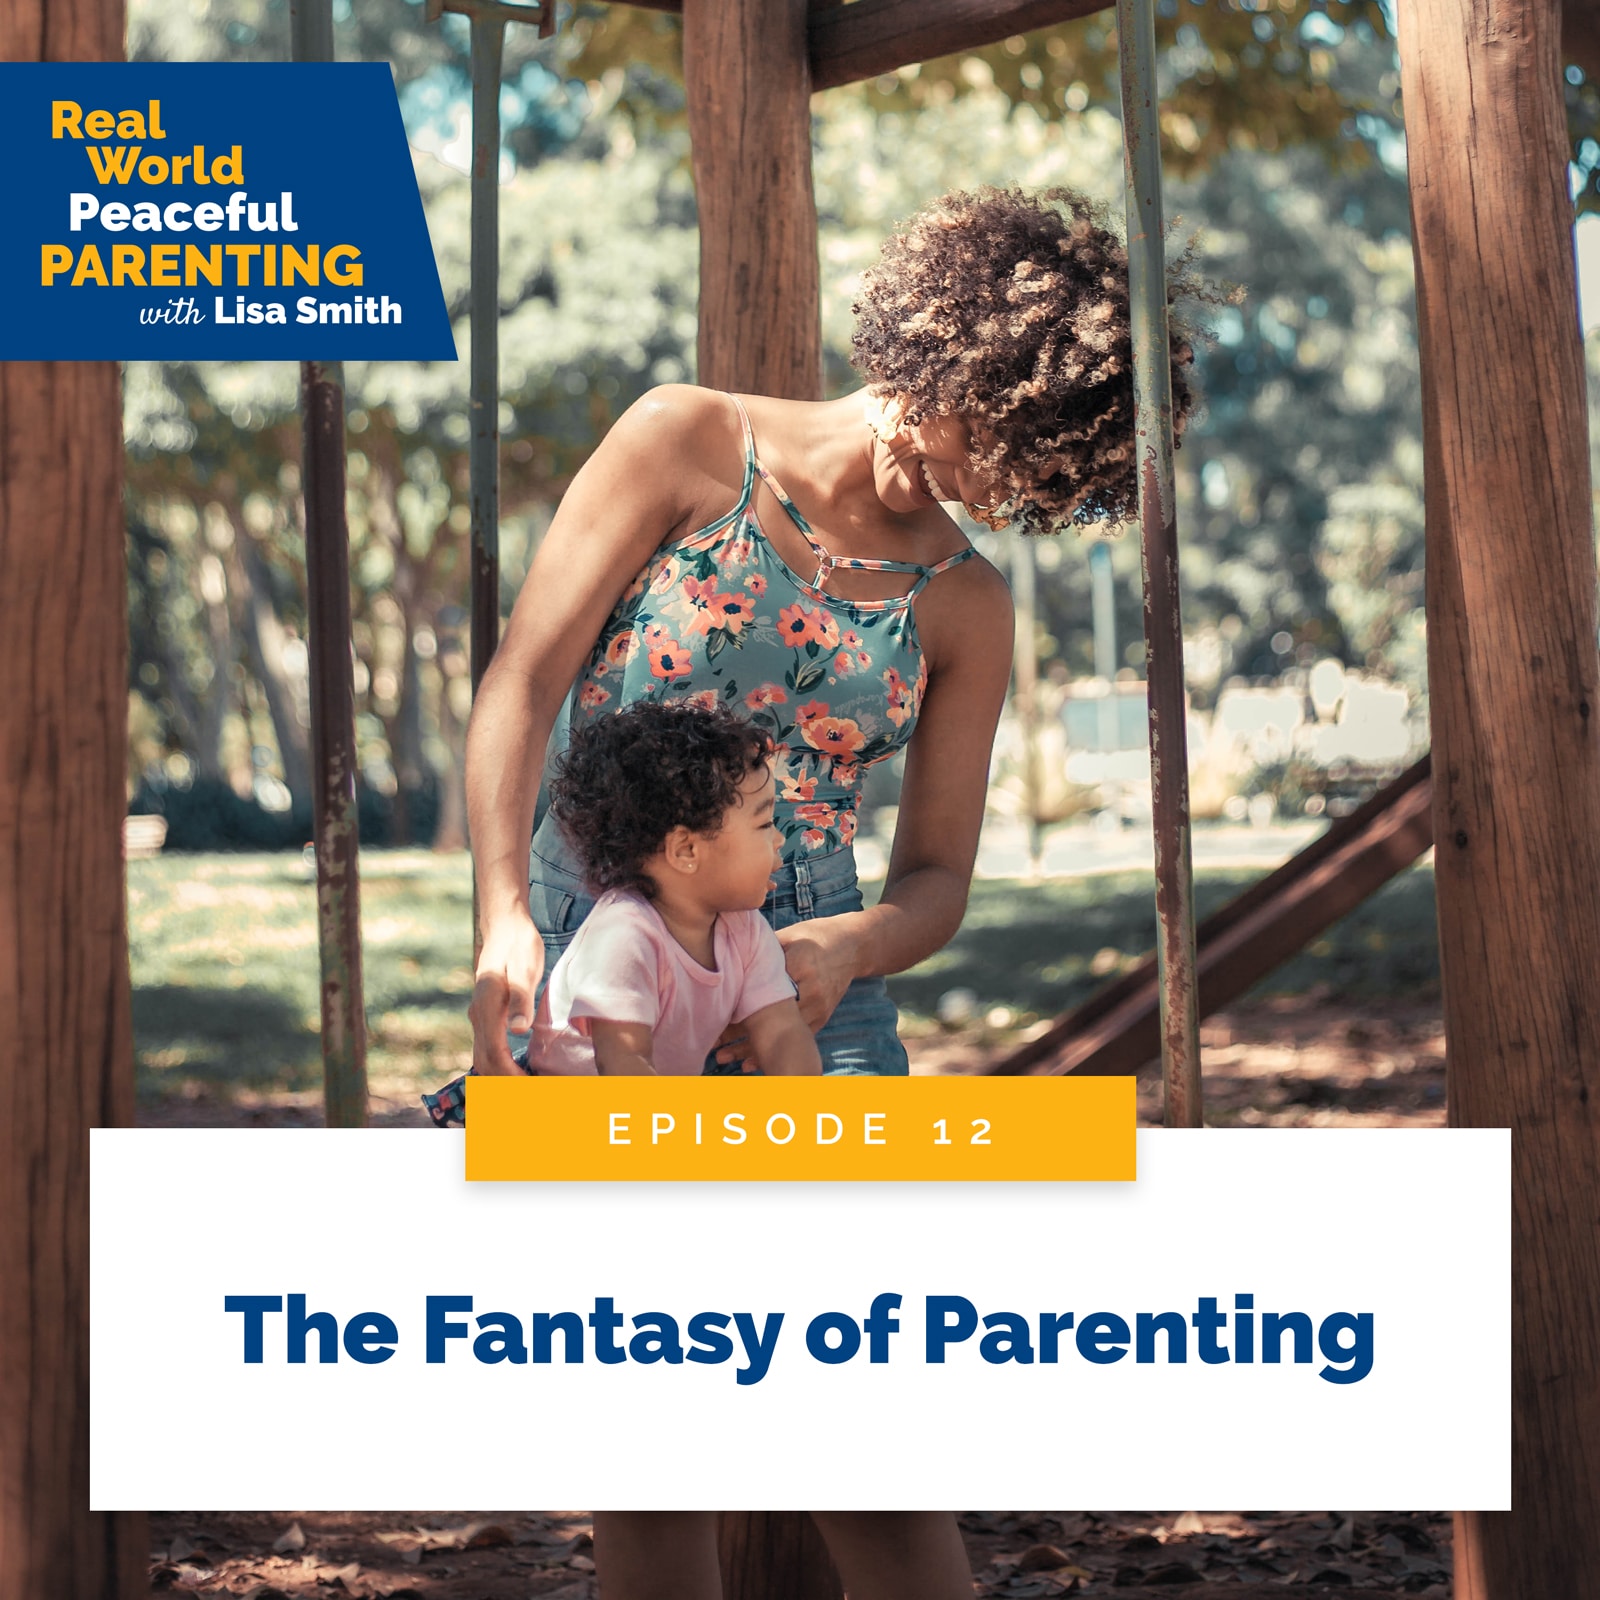 Real World Peaceful Parenting with Lisa Smith | The Fantasy of Parenting